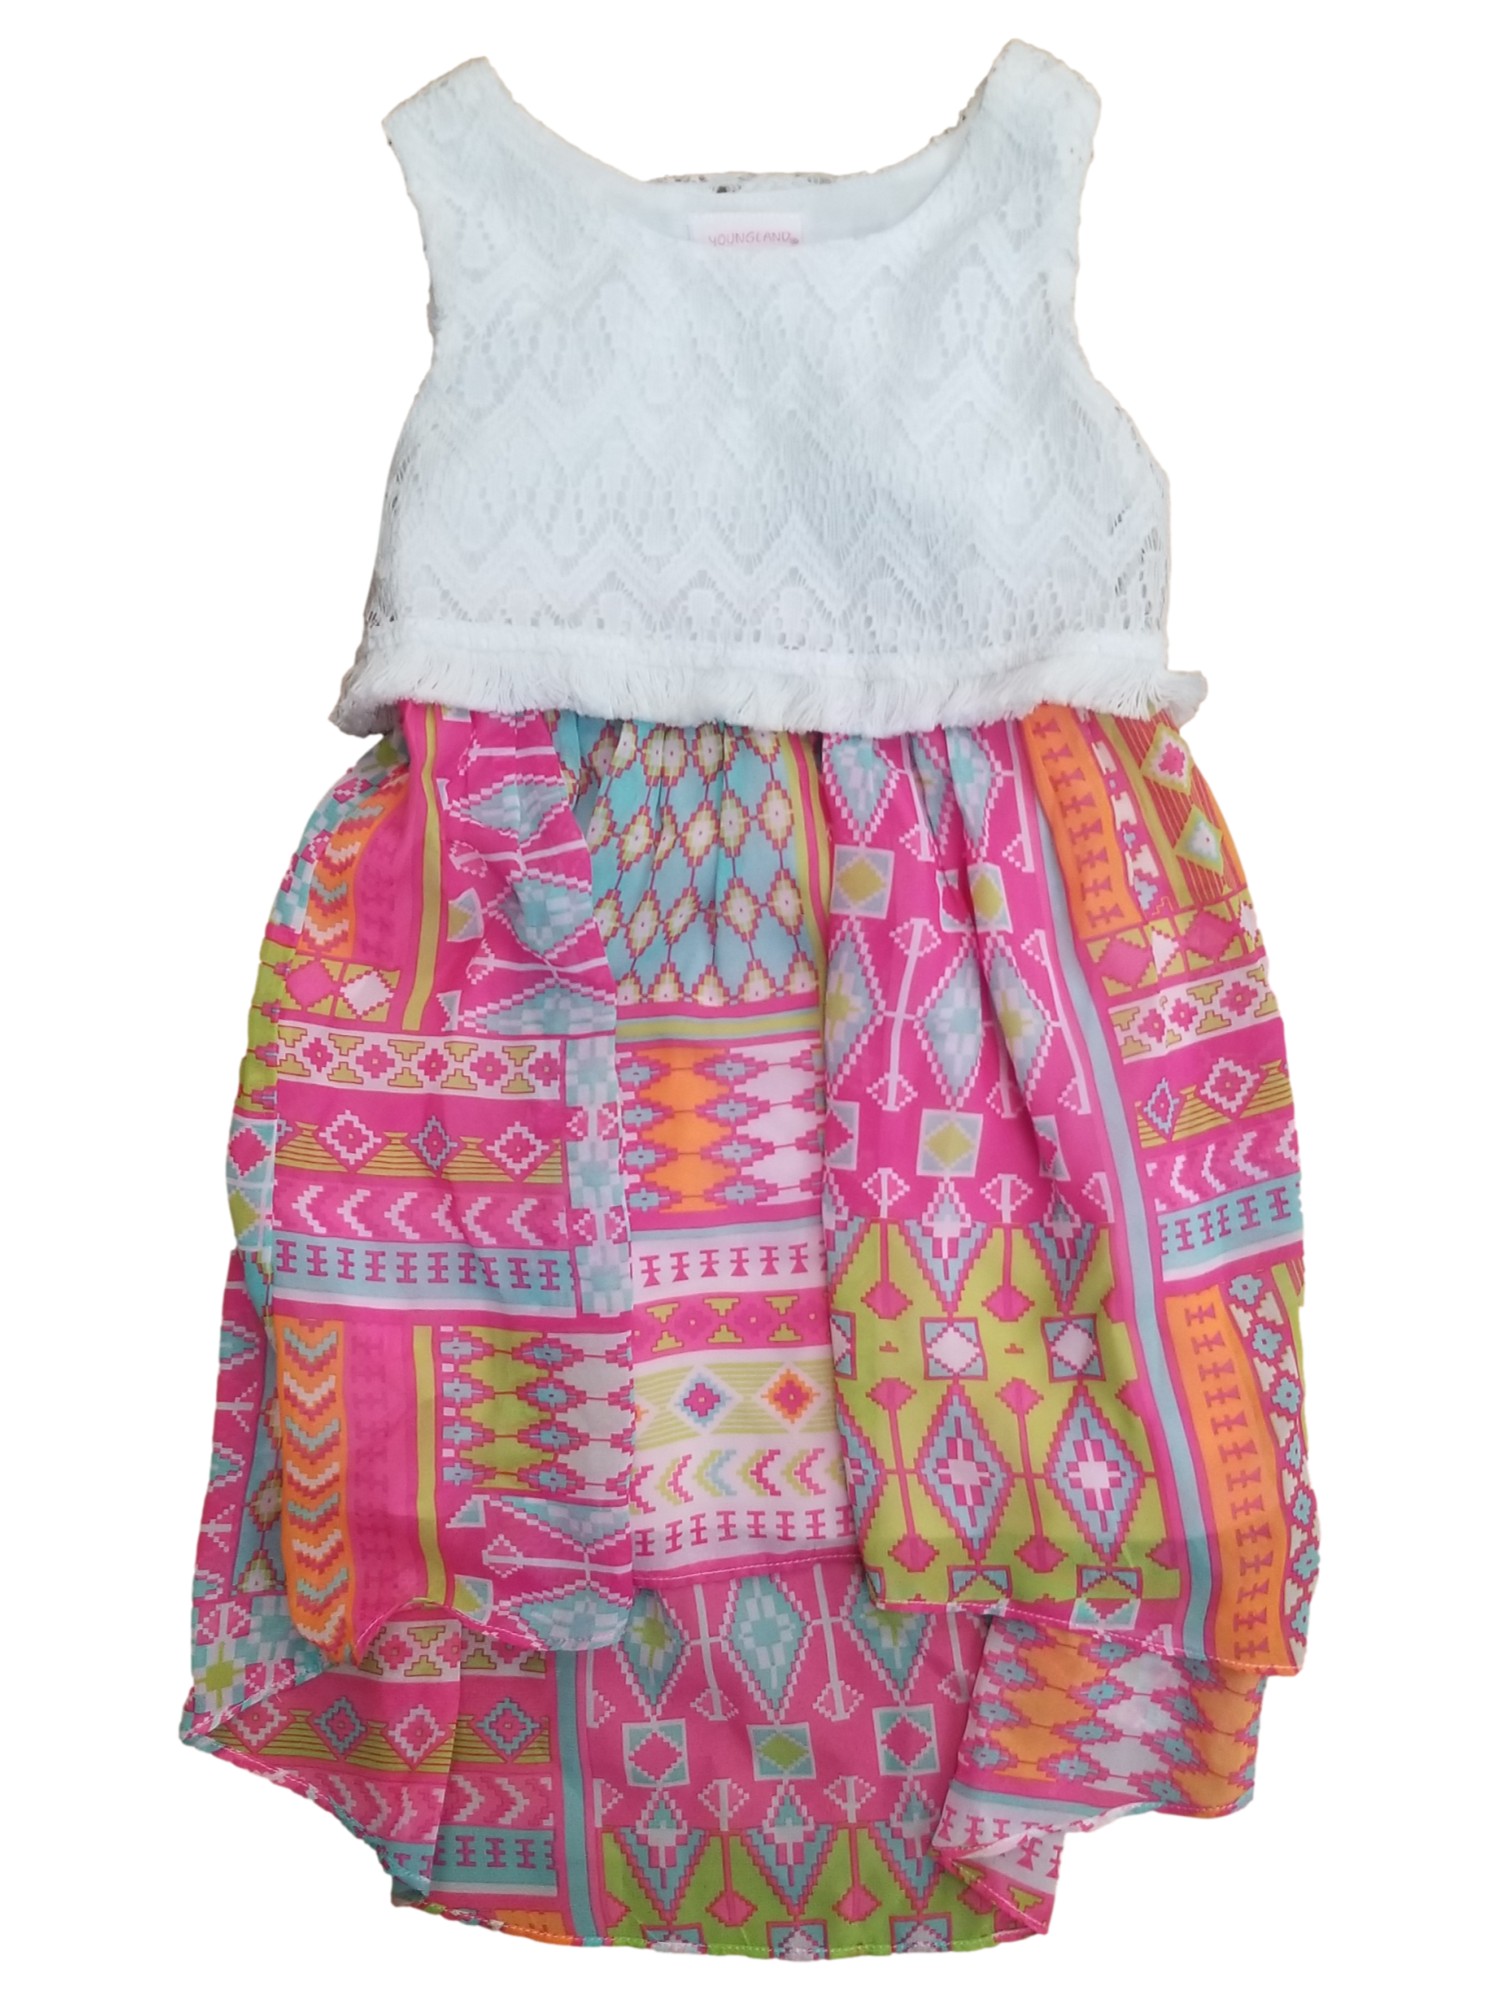 Youngland Toddler Girls White Orange & Pink Patterned High Low Dress w/ Tie 3T